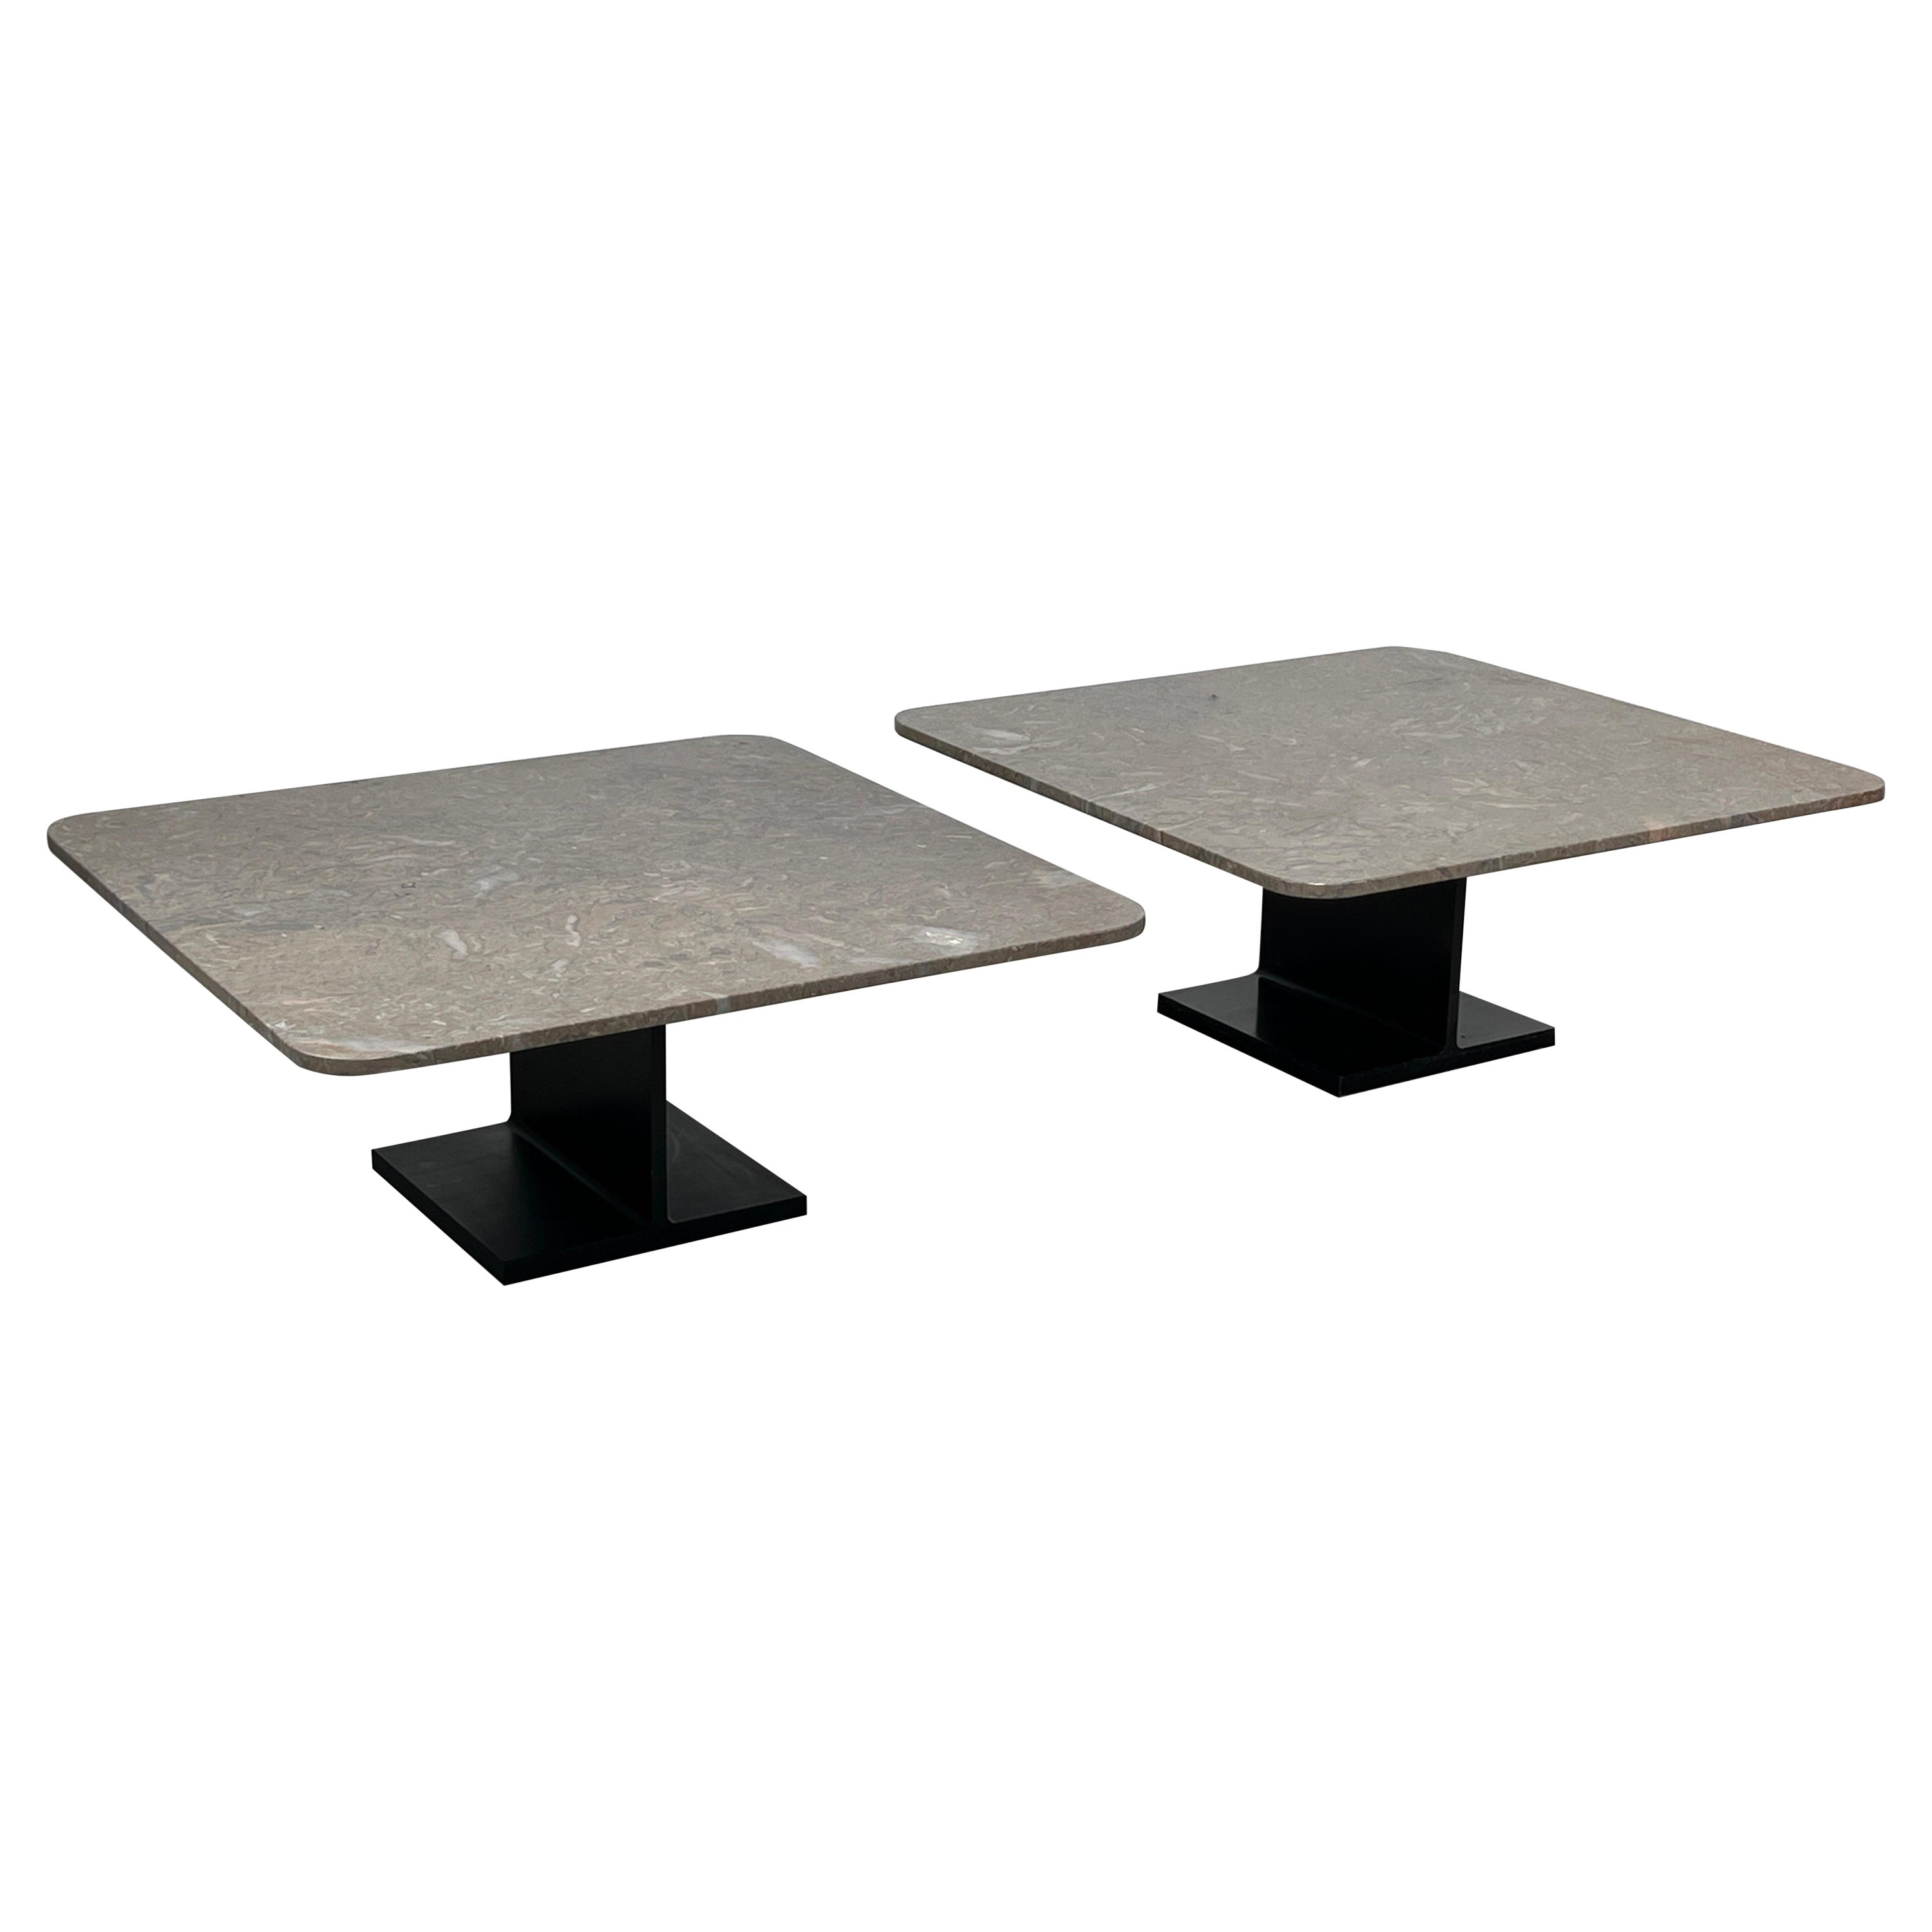 Pair of Ward Bennett I-Beam Coffee Tables For Sale